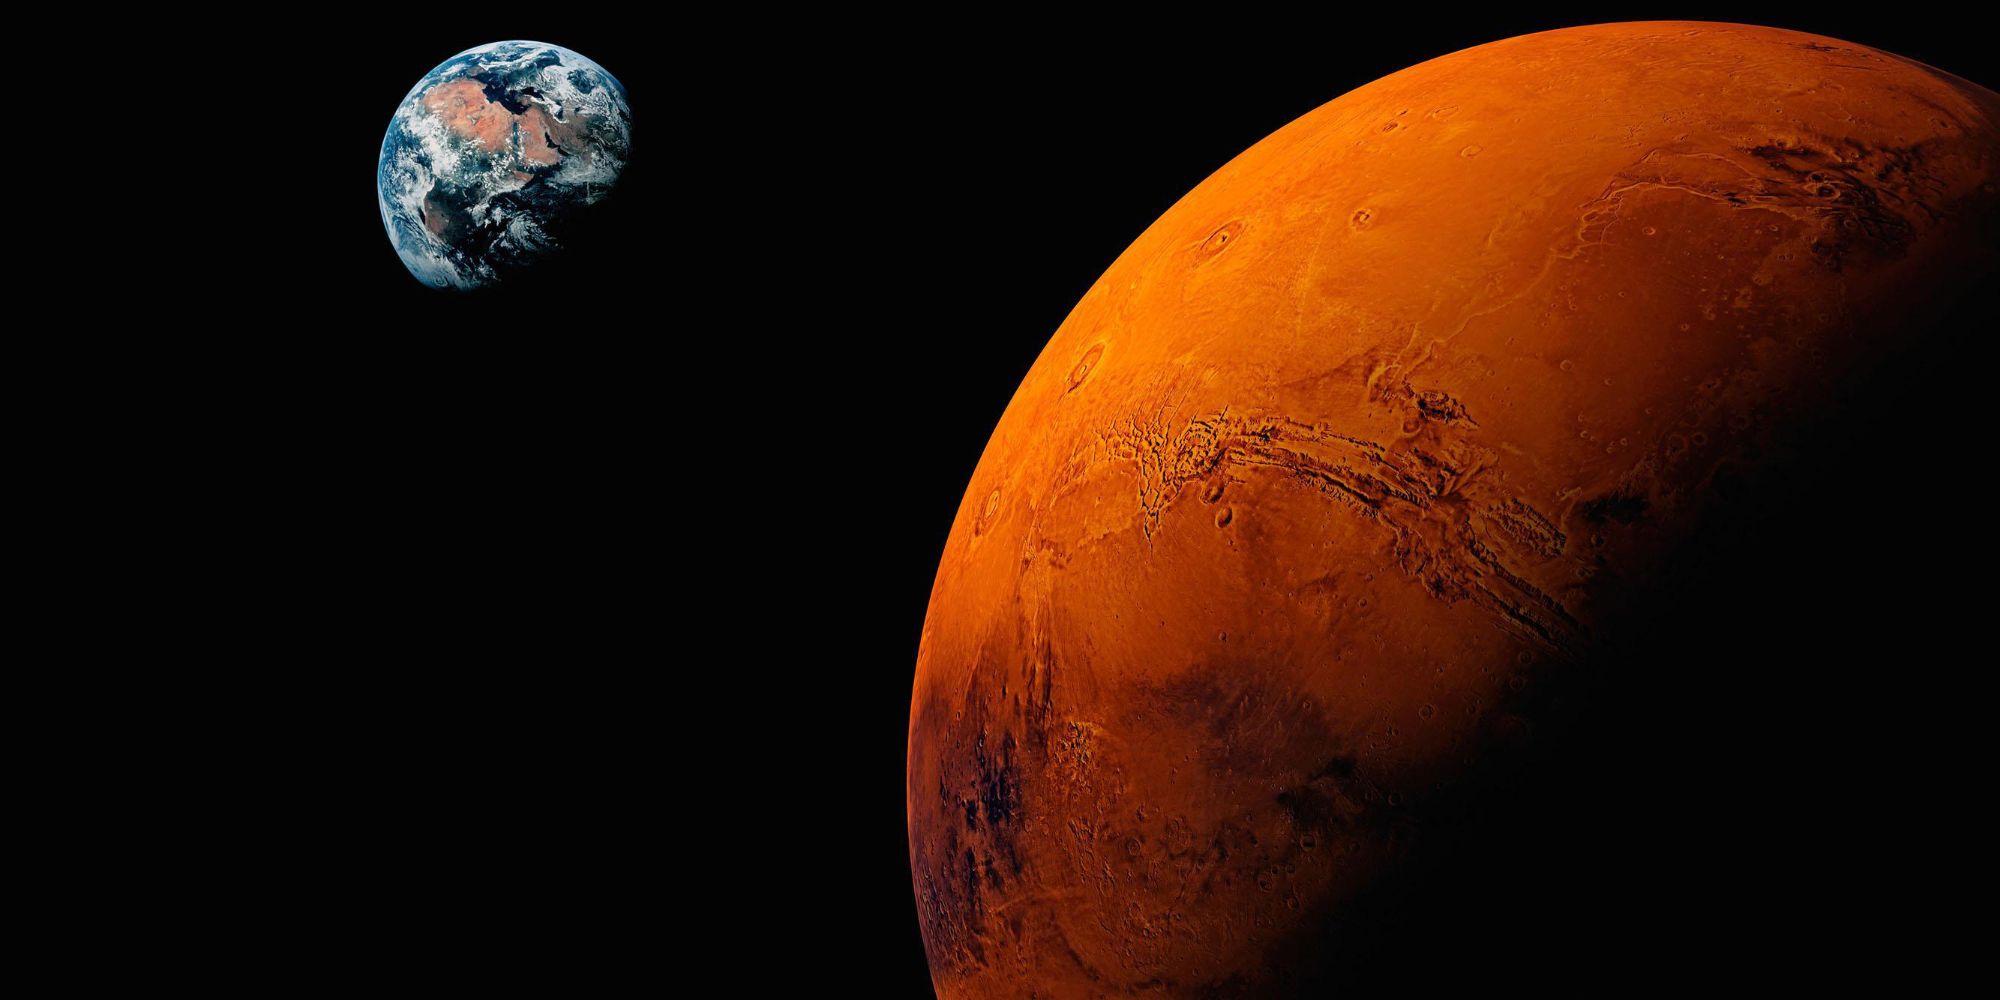 How long does it take to get to Mars?